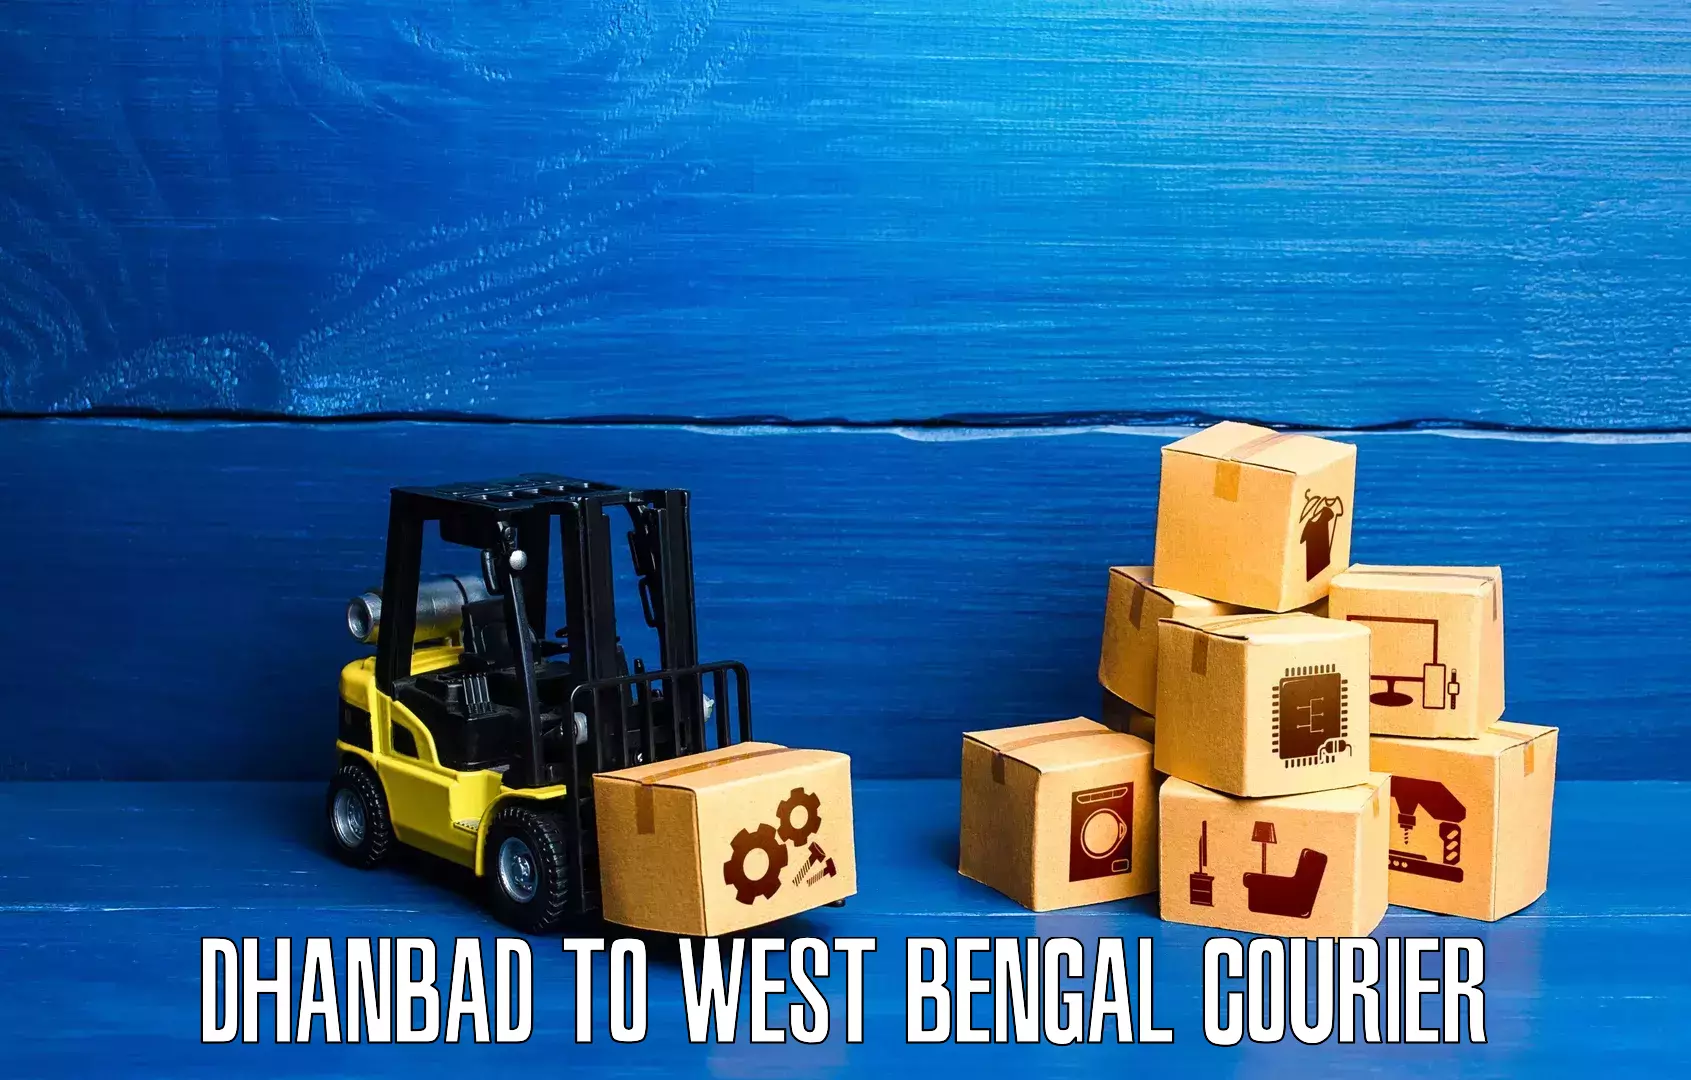 Subscription-based courier Dhanbad to West Bengal